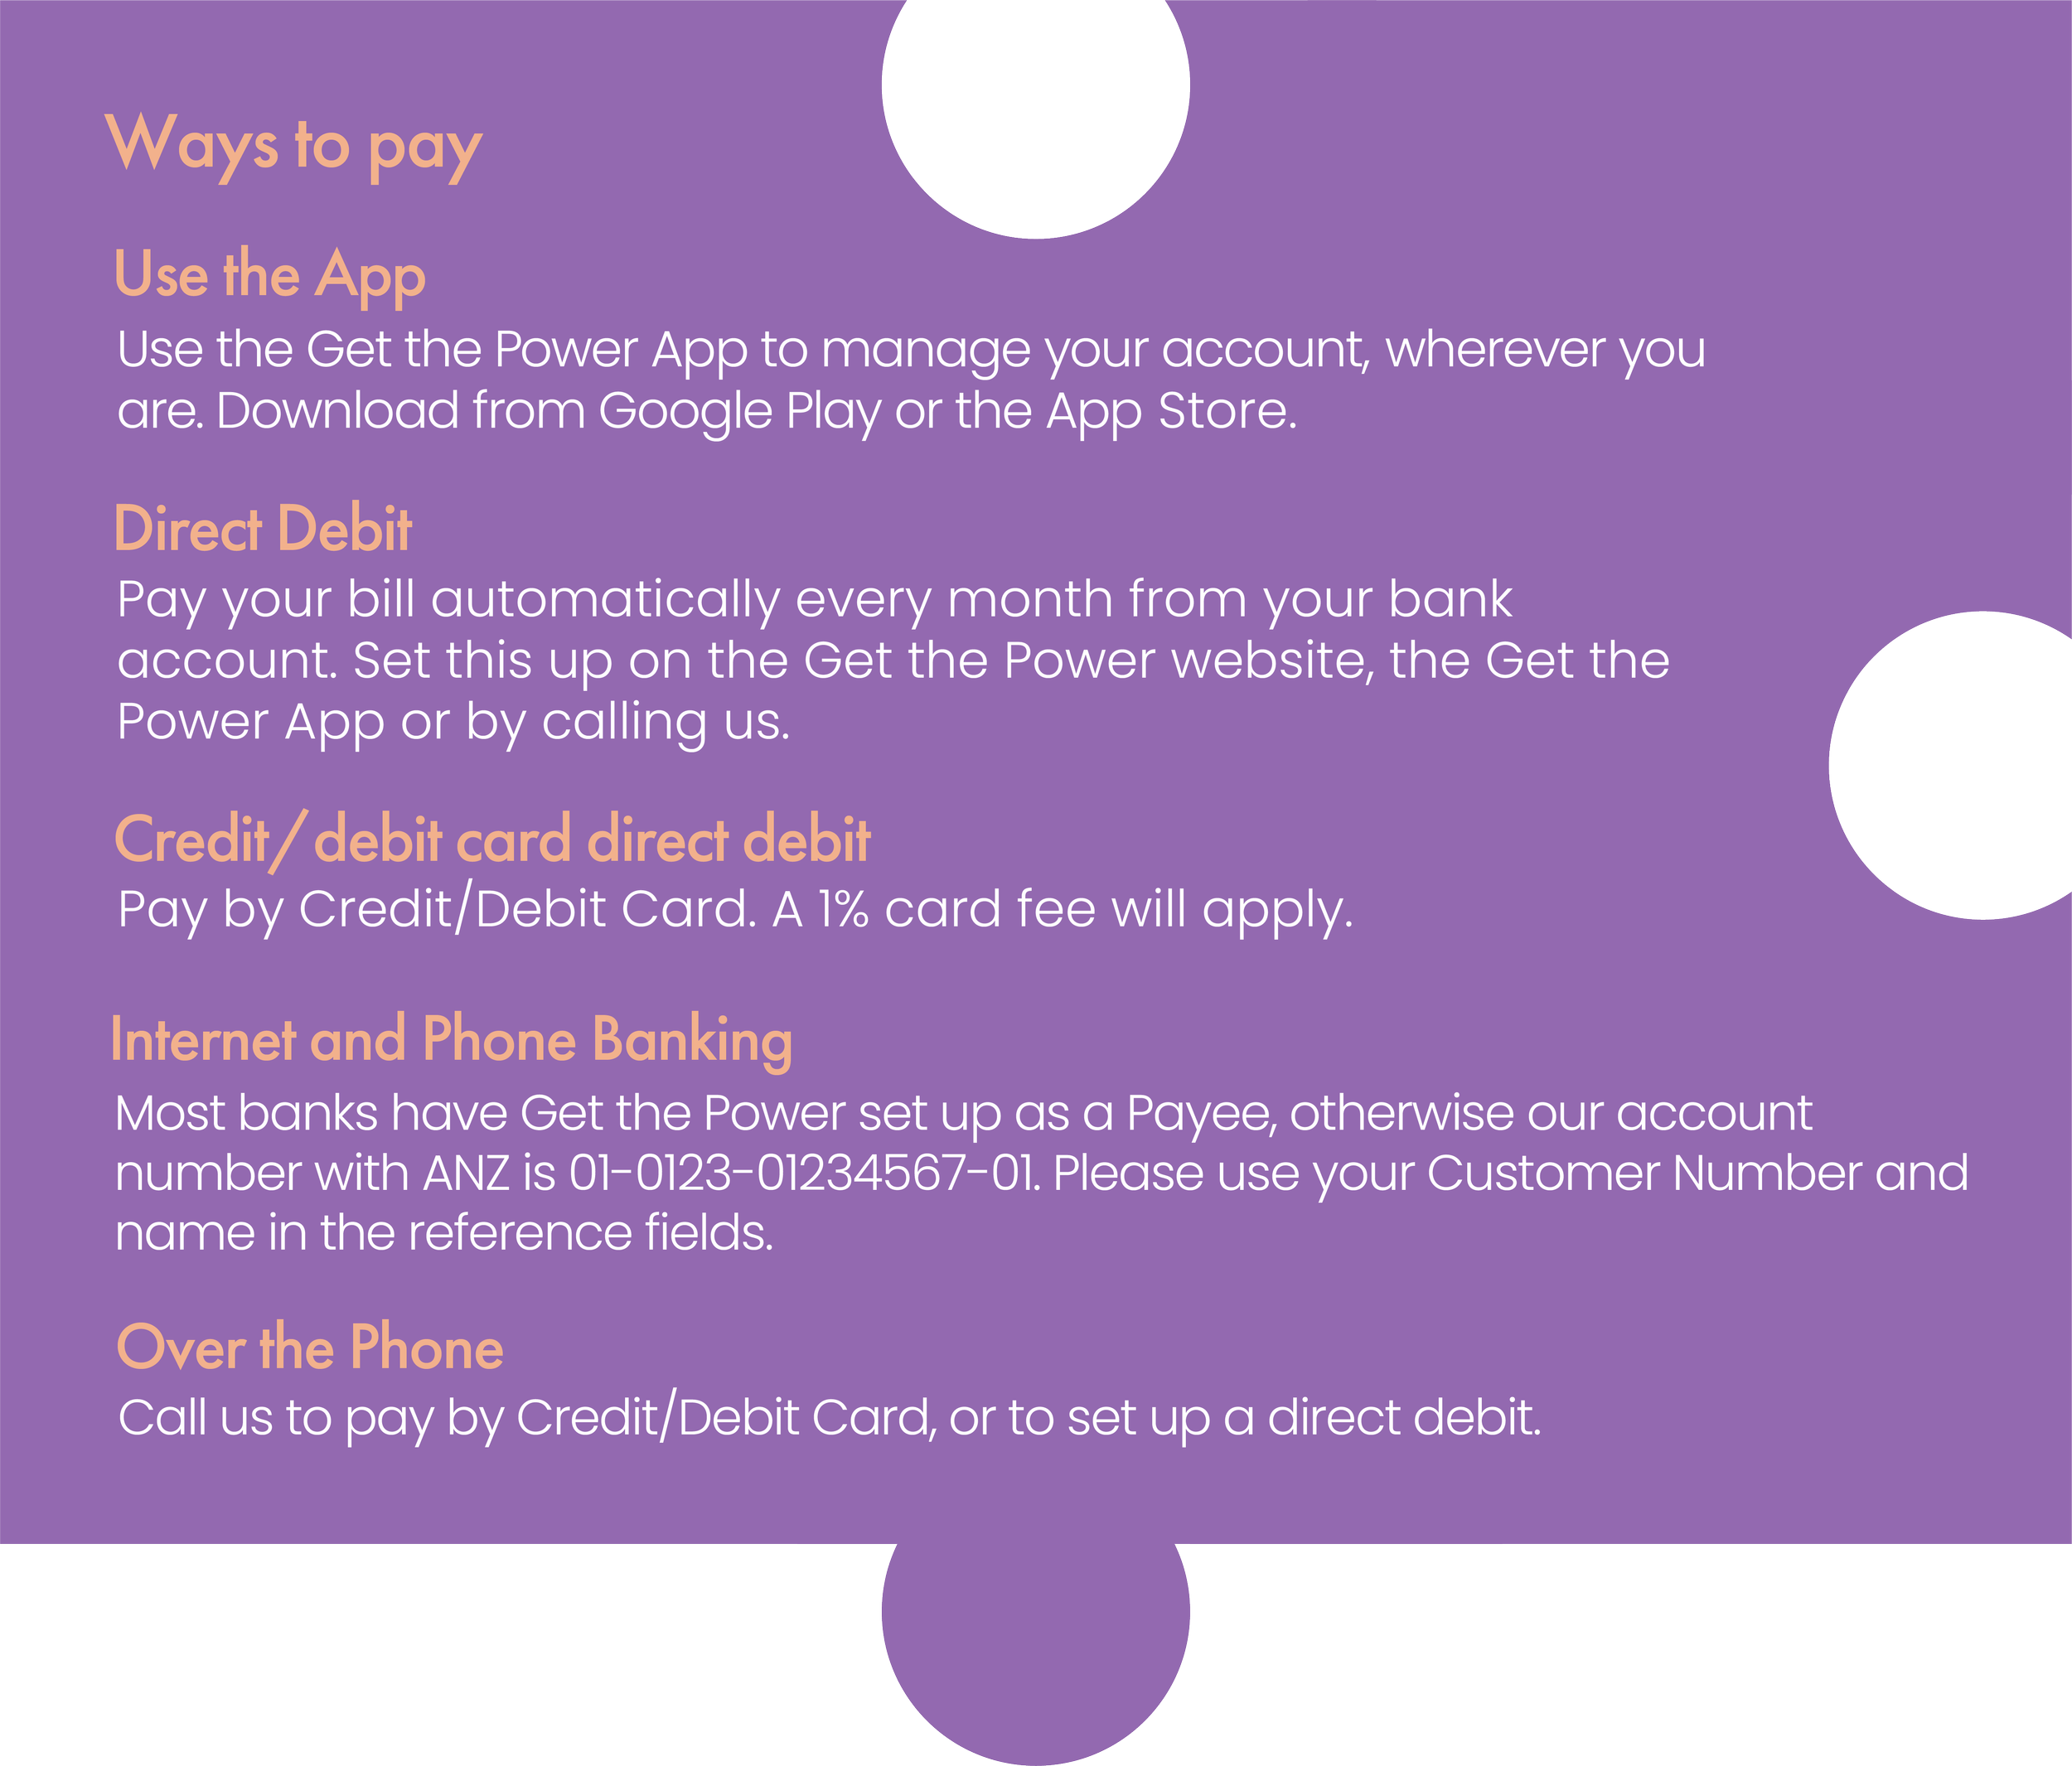 4. Ways to Pay